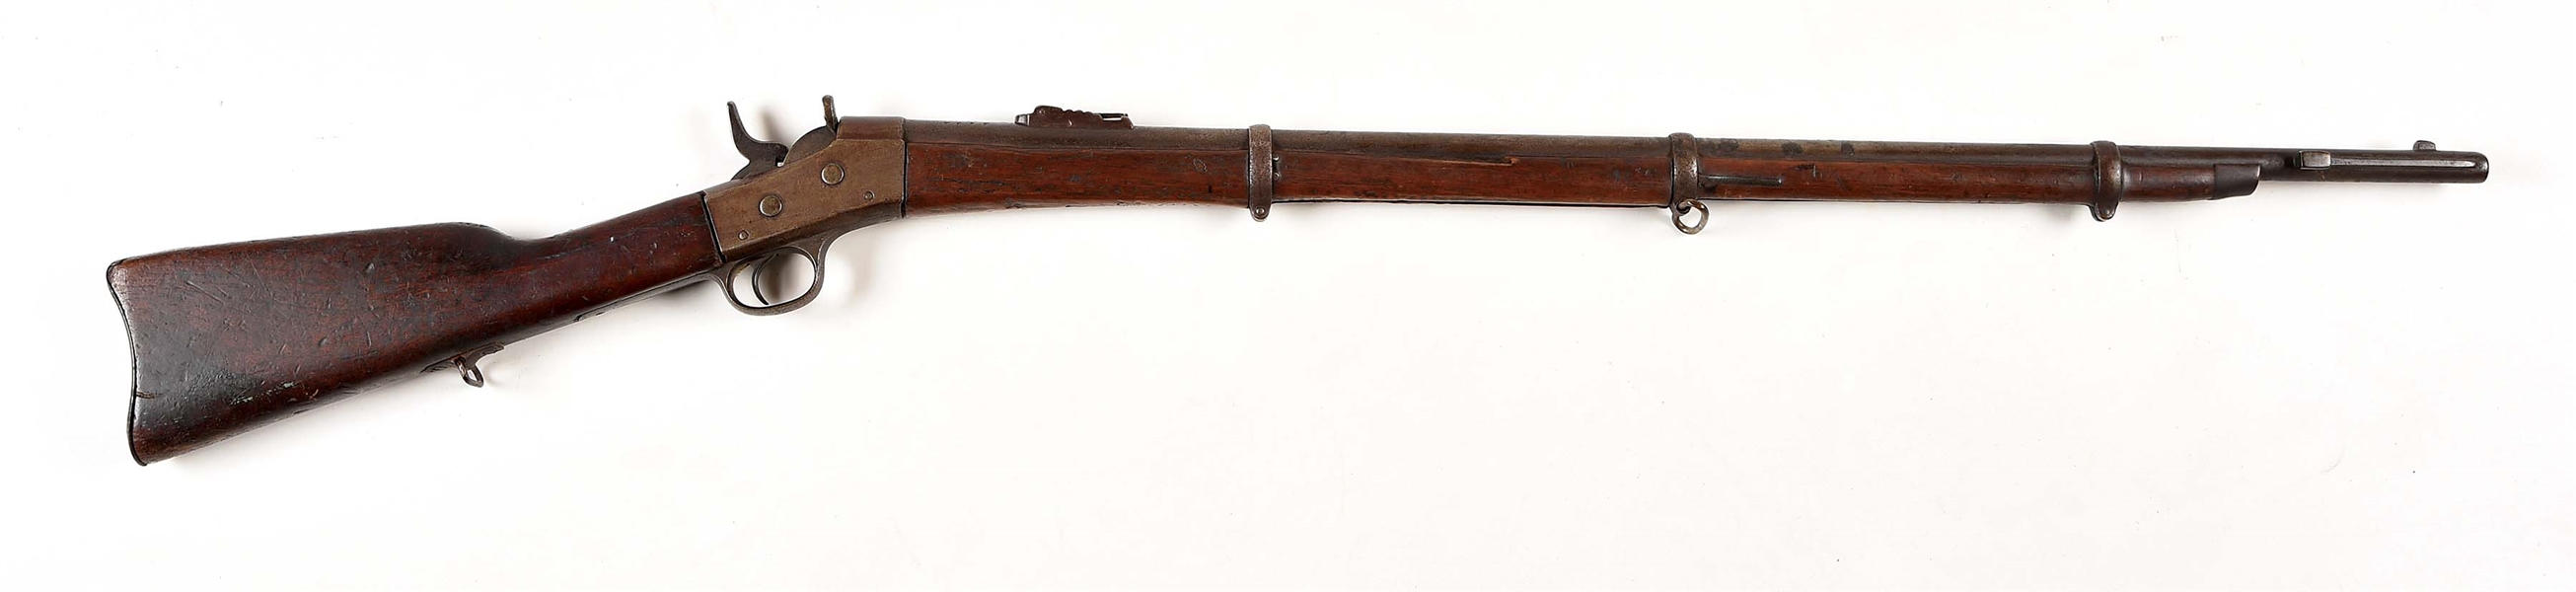 (A) EGYPTIAN CONTRACT REMINGTON ROLLING BLOCK RIFLE.